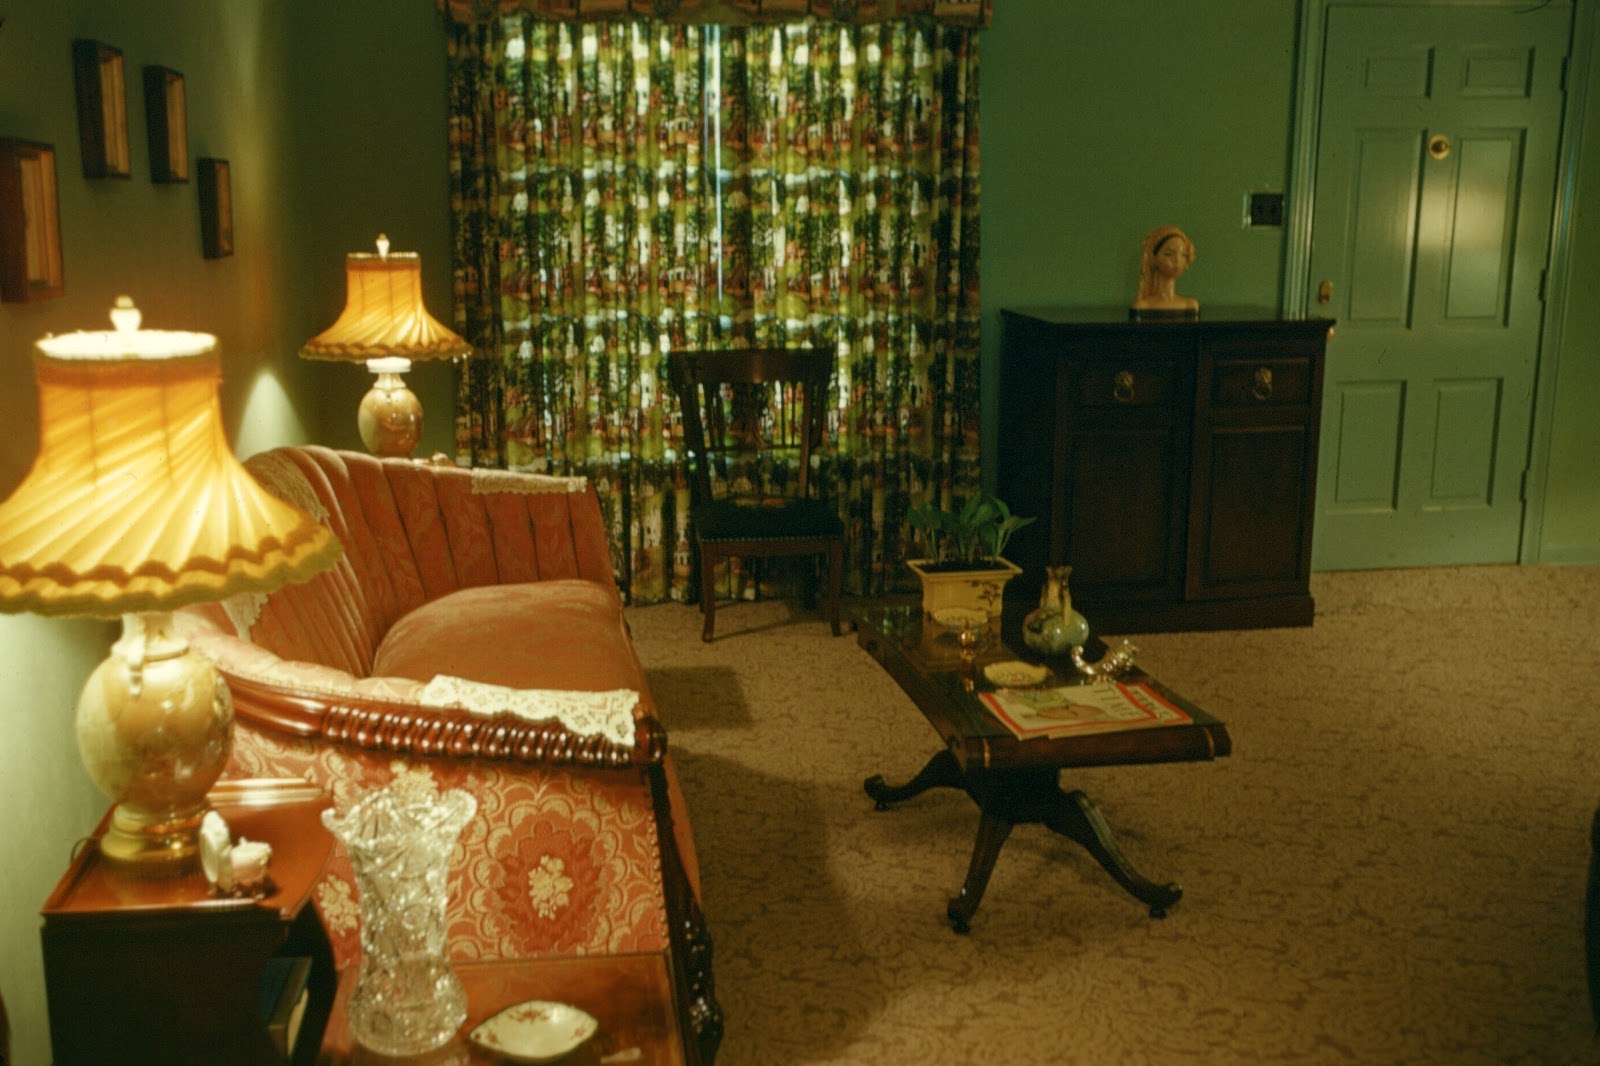 James H. Law, Photographer: Circa 1940s Home Interiors by James H. Law